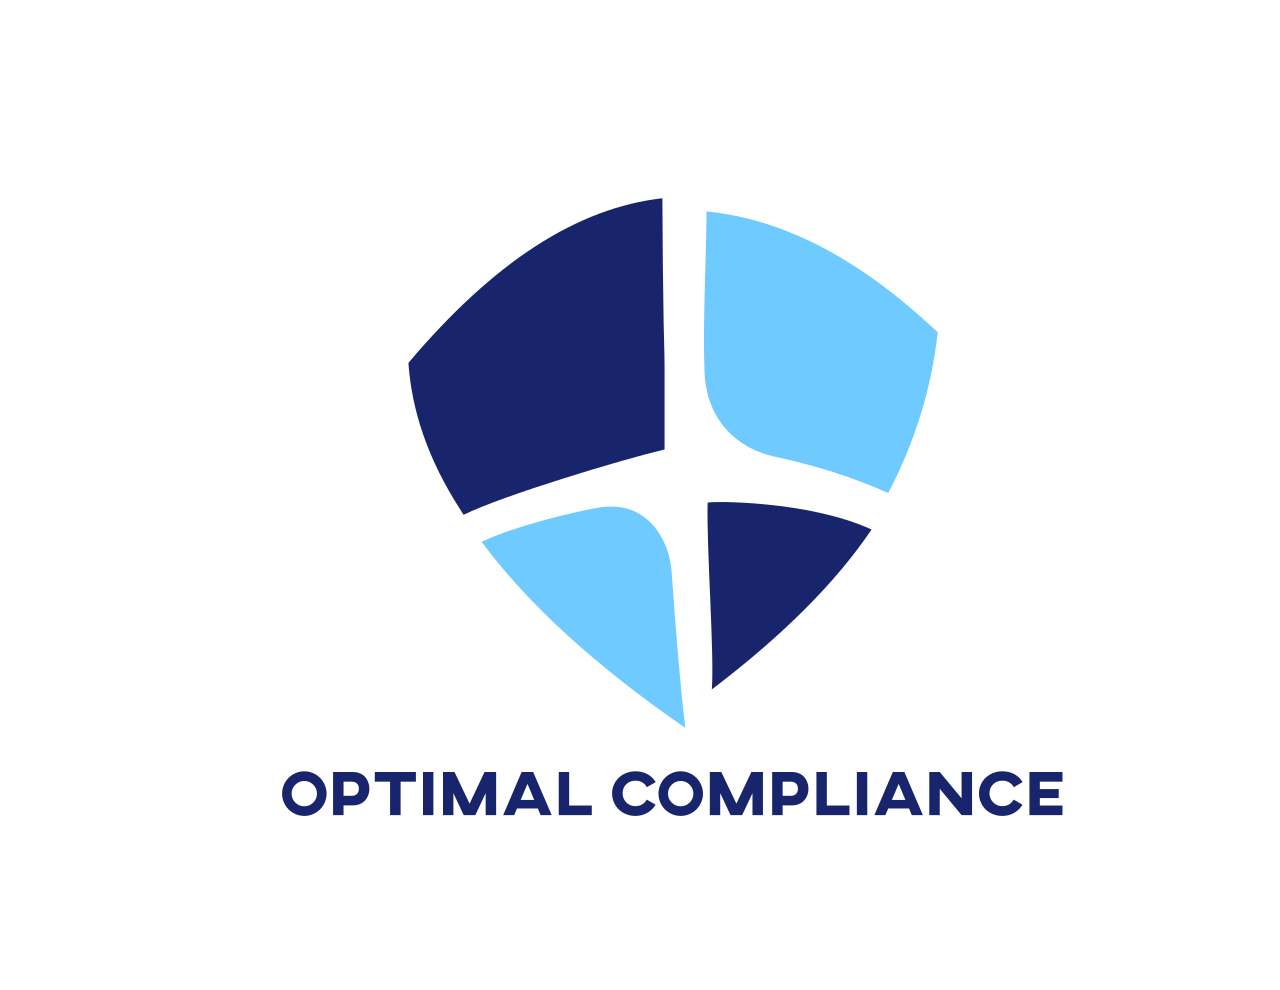 OPTIMAL COMPLIANCE SYSTEMS LTD's web page